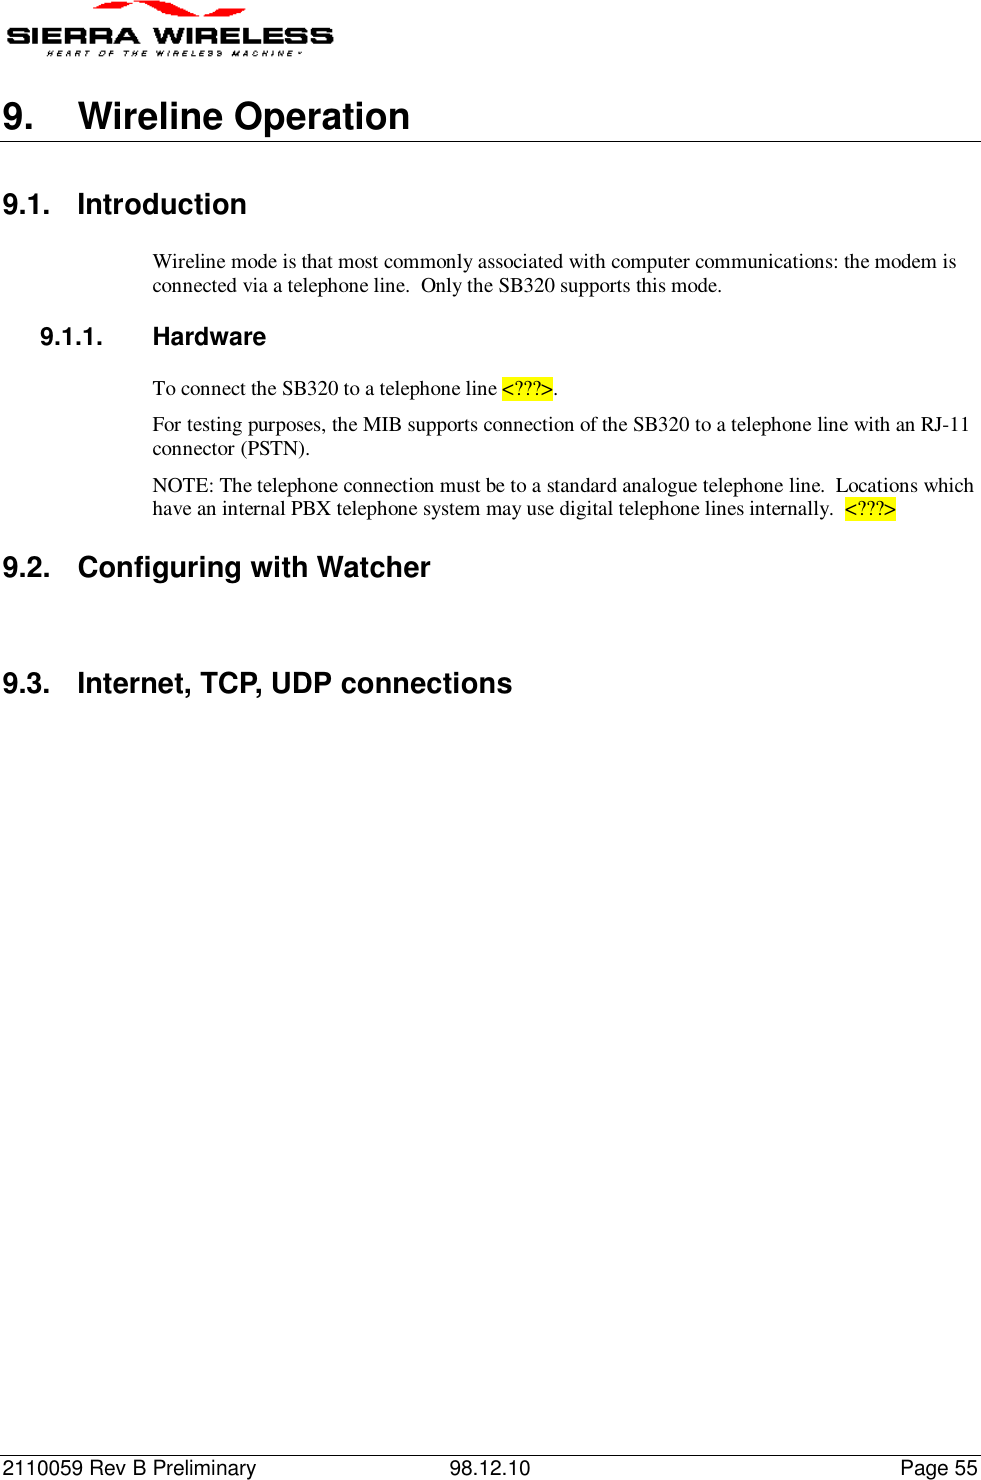 2110059 Rev B Preliminary 98.12.10 Page 559. Wireline Operation9.1. IntroductionWireline mode is that most commonly associated with computer communications: the modem isconnected via a telephone line.  Only the SB320 supports this mode.9.1.1. HardwareTo connect the SB320 to a telephone line &lt;???&gt;.For testing purposes, the MIB supports connection of the SB320 to a telephone line with an RJ-11connector (PSTN).NOTE: The telephone connection must be to a standard analogue telephone line.  Locations whichhave an internal PBX telephone system may use digital telephone lines internally.  &lt;???&gt;9.2.  Configuring with Watcher9.3.  Internet, TCP, UDP connections